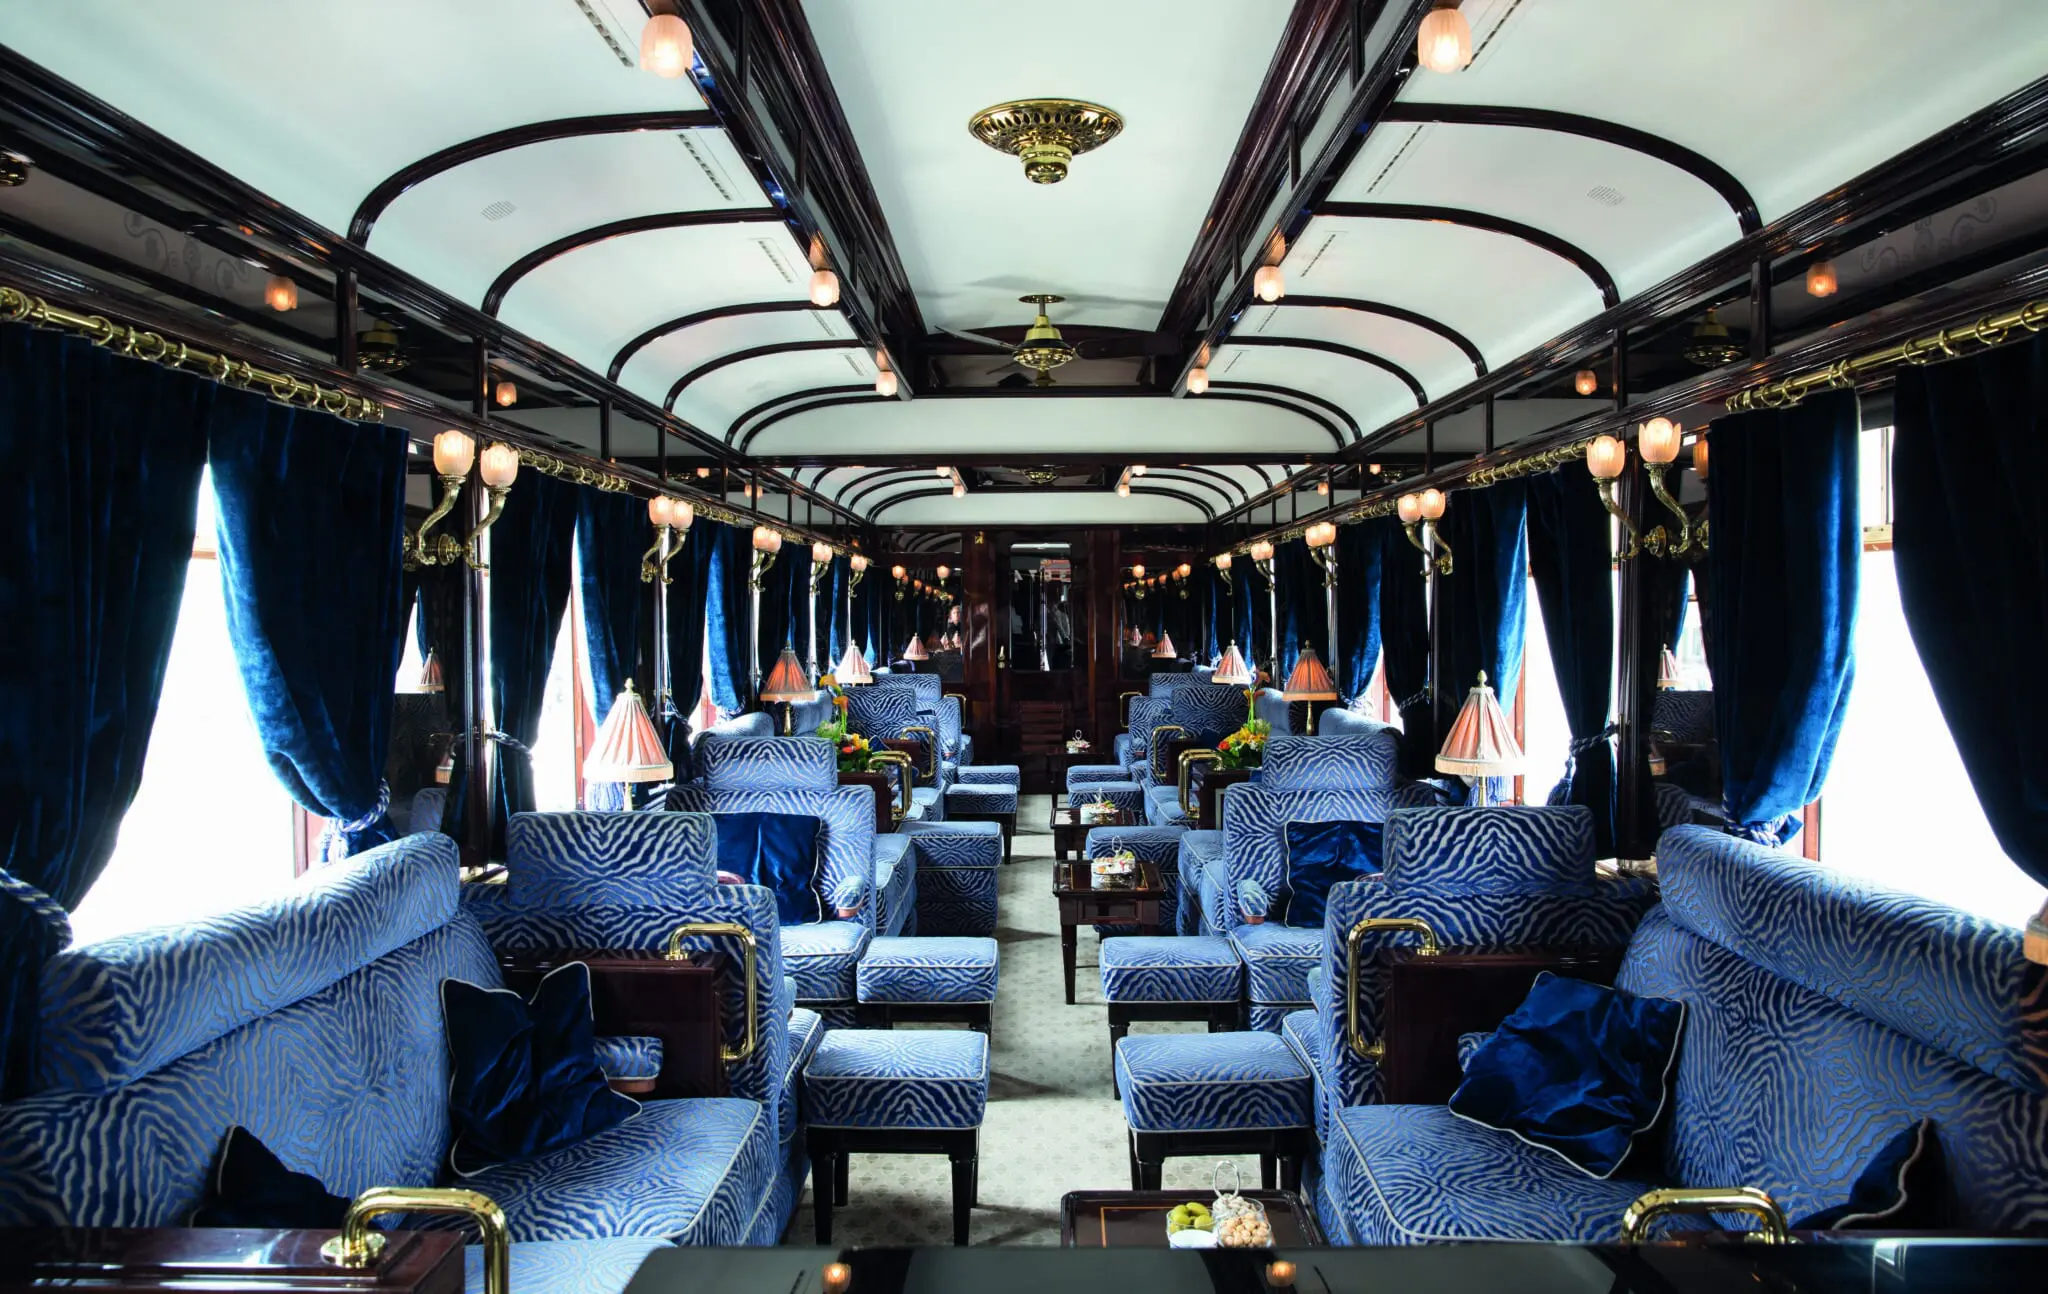 Image of a carriage inside the Venice Simplon Orient Express